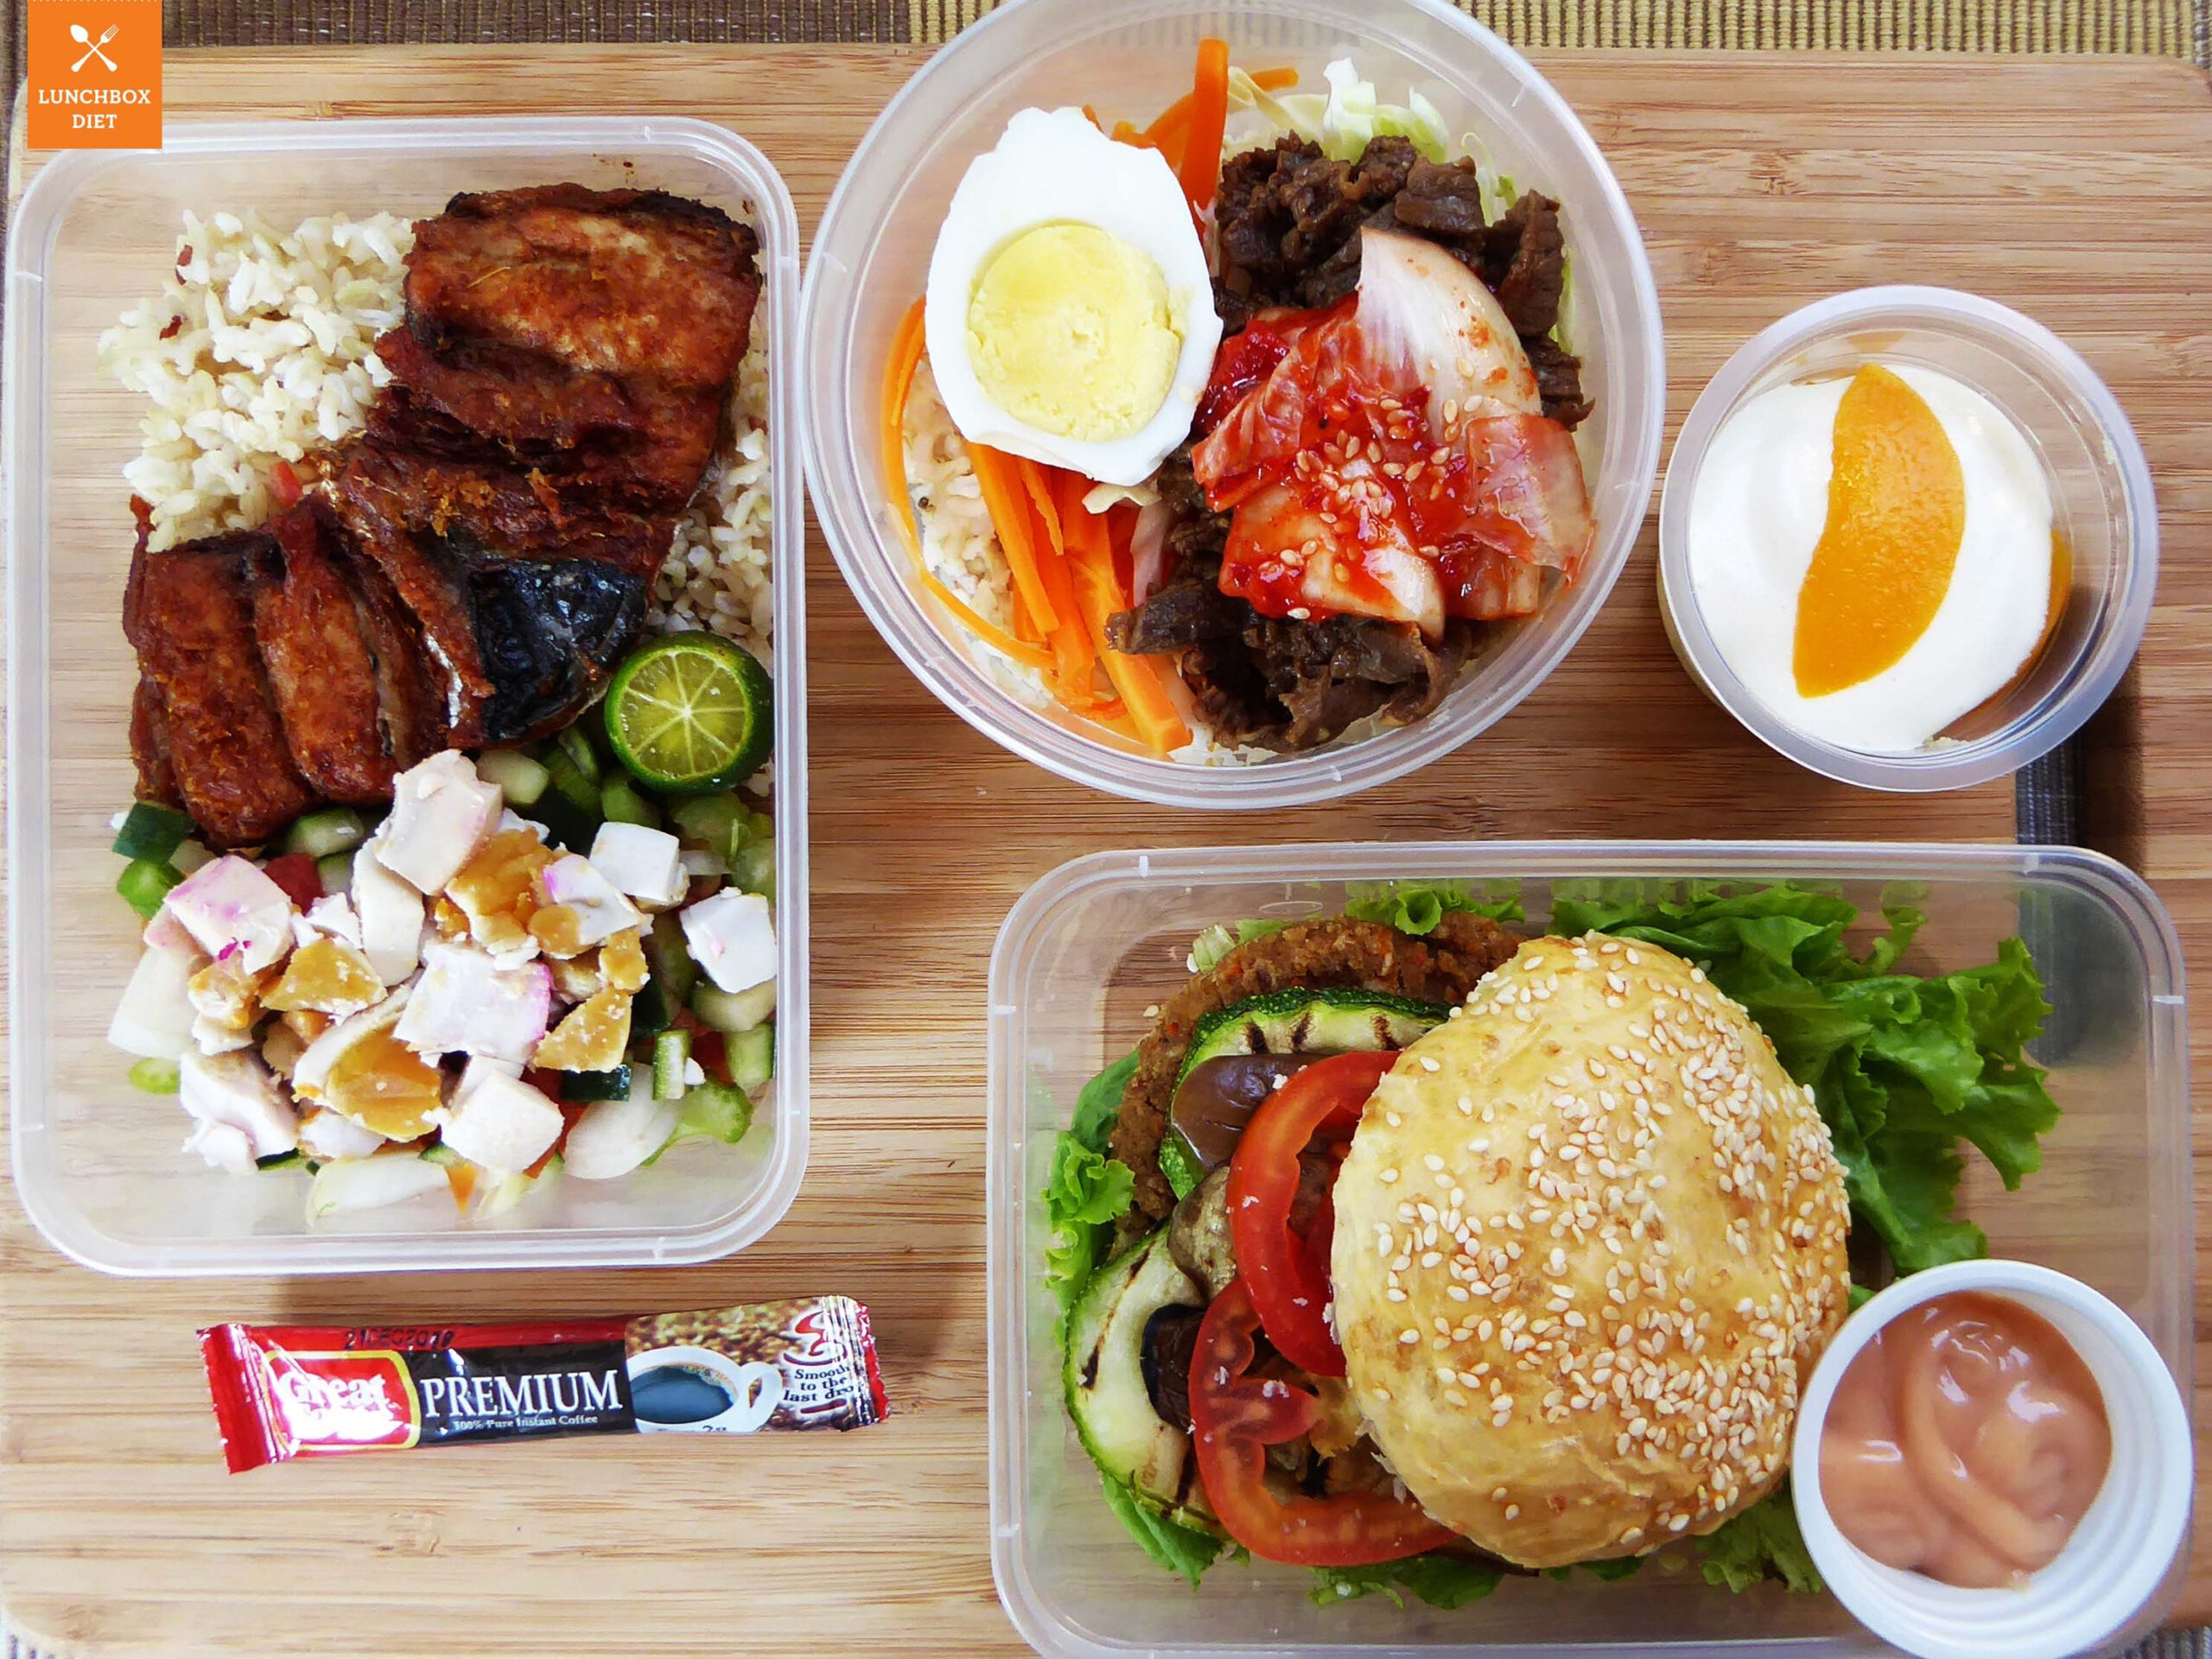 DIET DELIVERY Lunchbox Diet Serves Healthy Meals Right At 